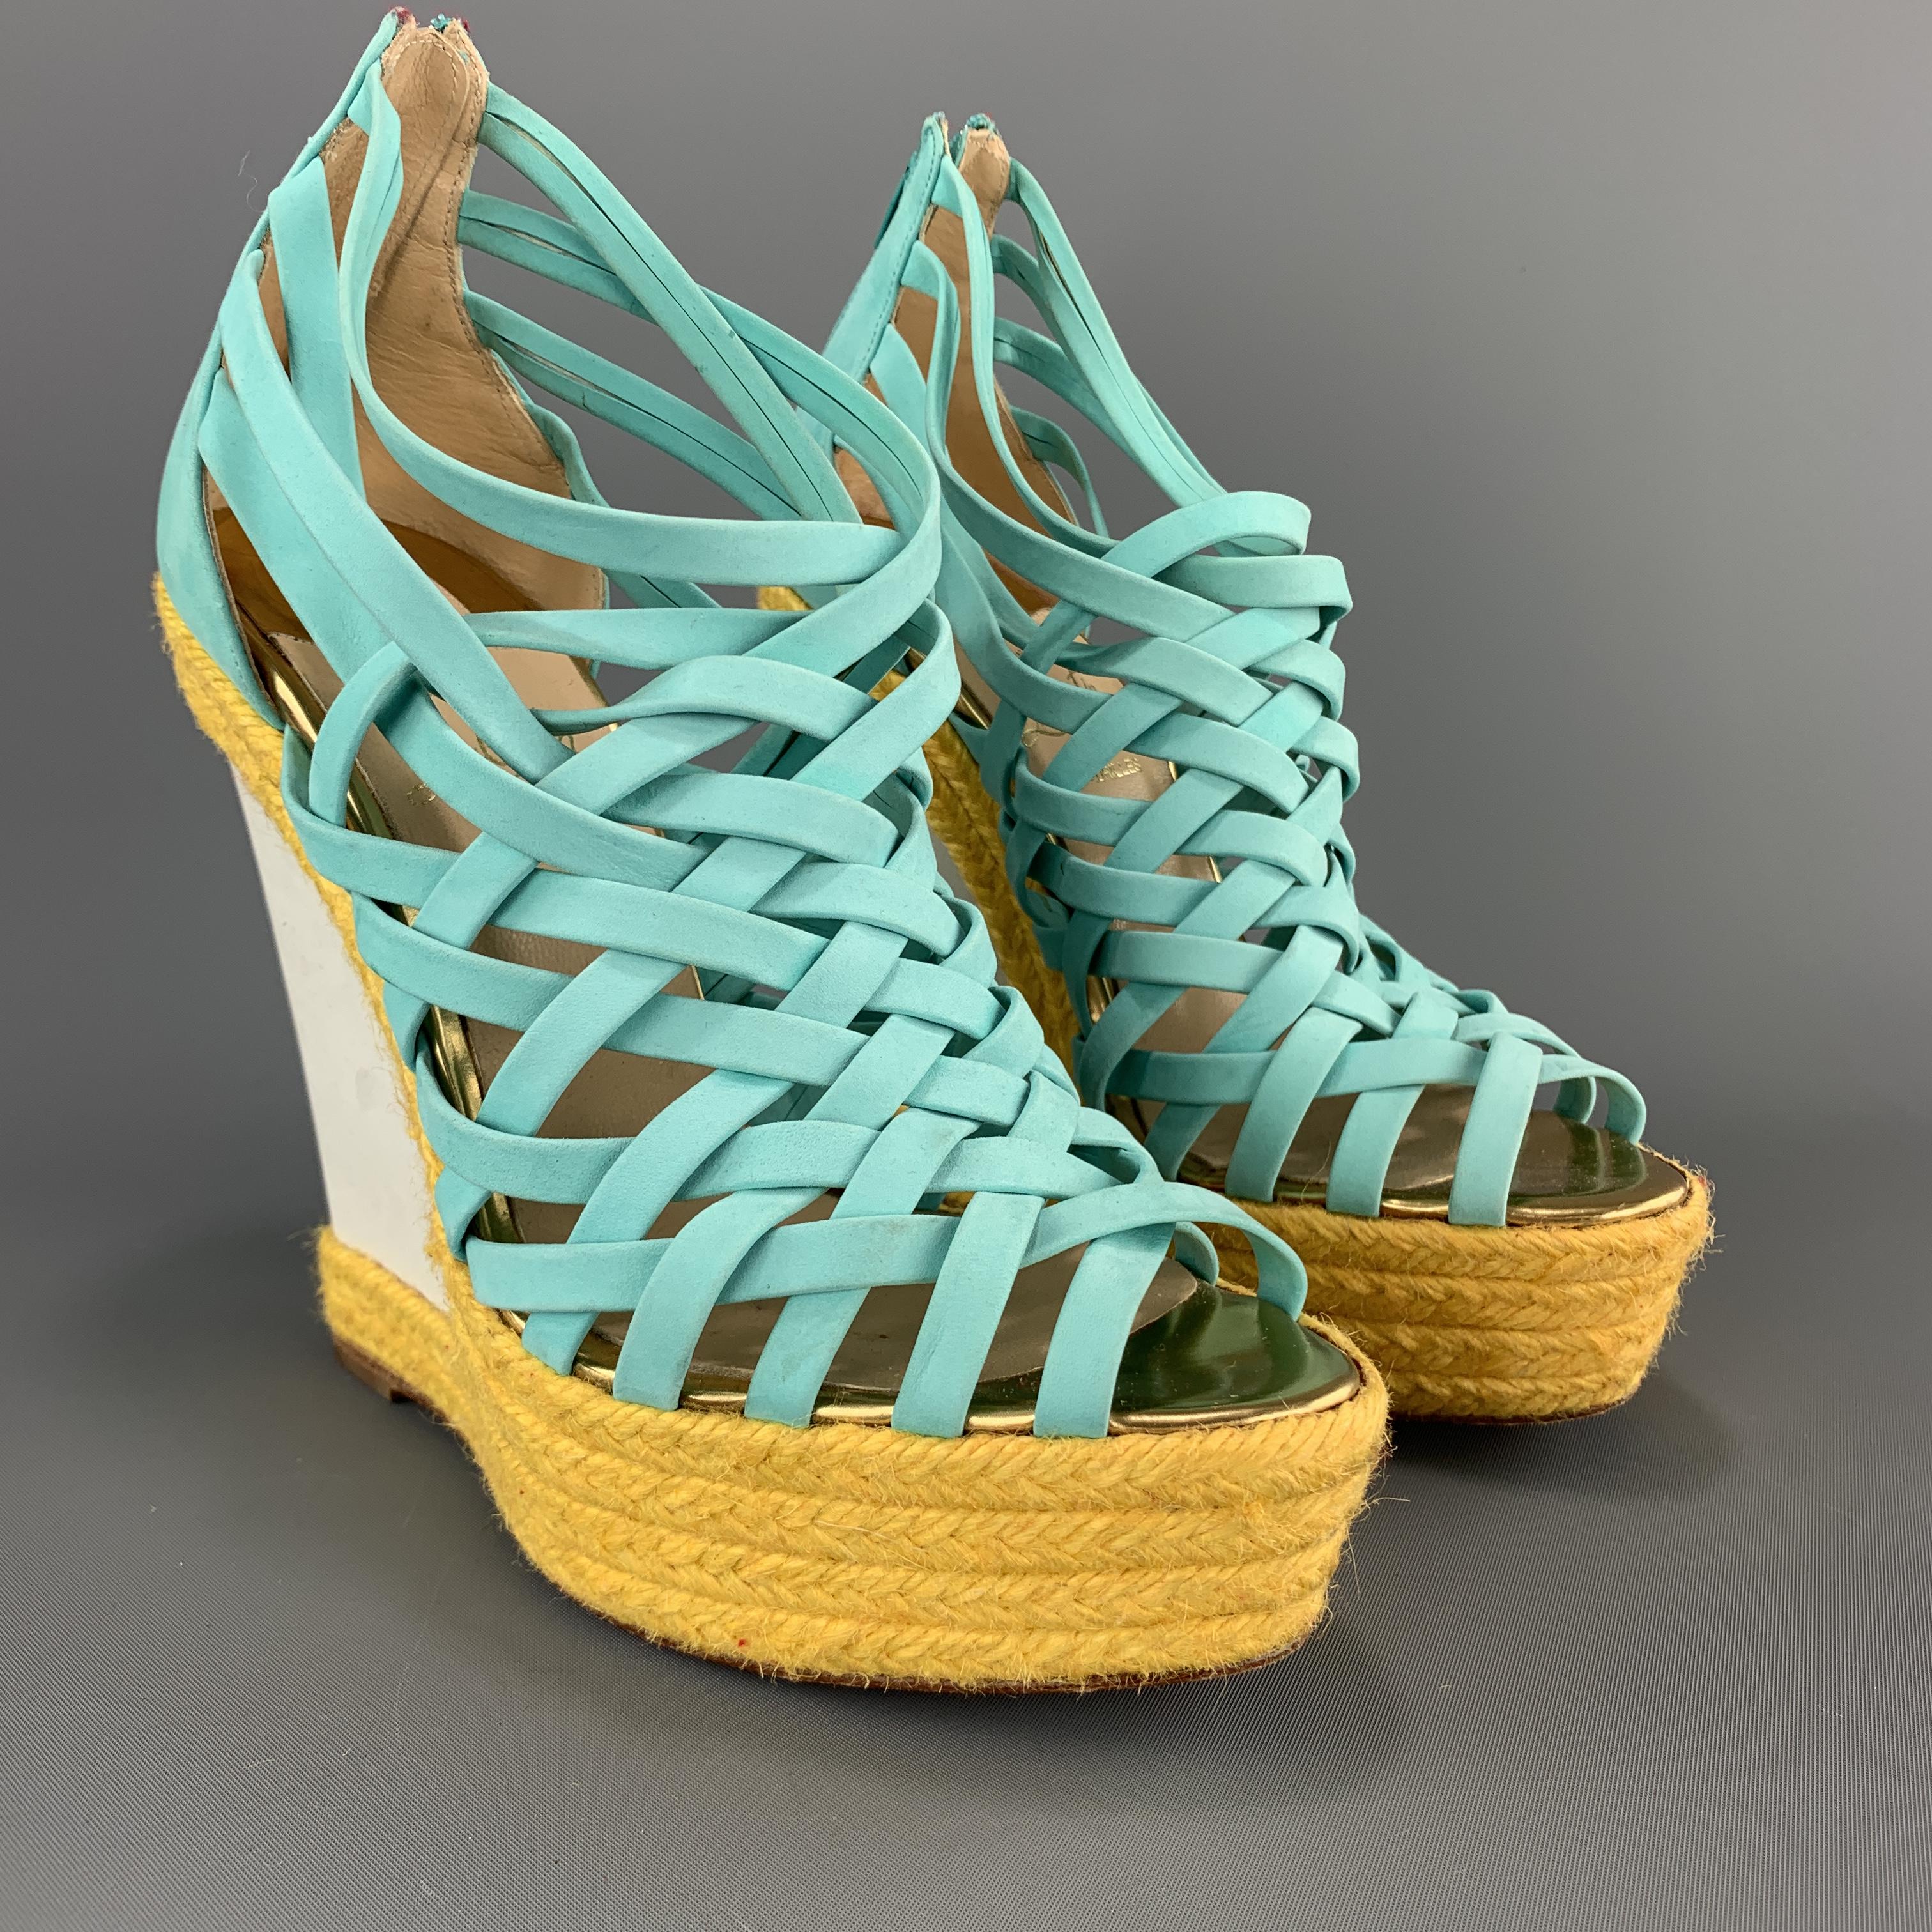 CHRISTIAN LOUBOUTIN espadrille wedges feature turquoise suede woven straps with a white suede platform wedge detailed with yellow braid trim. Made in Spain.

Excellent Pre-Owned Condition.
Marked: IT 37

Measurements:

Heel: 5.5 in.
Platform: 1.25